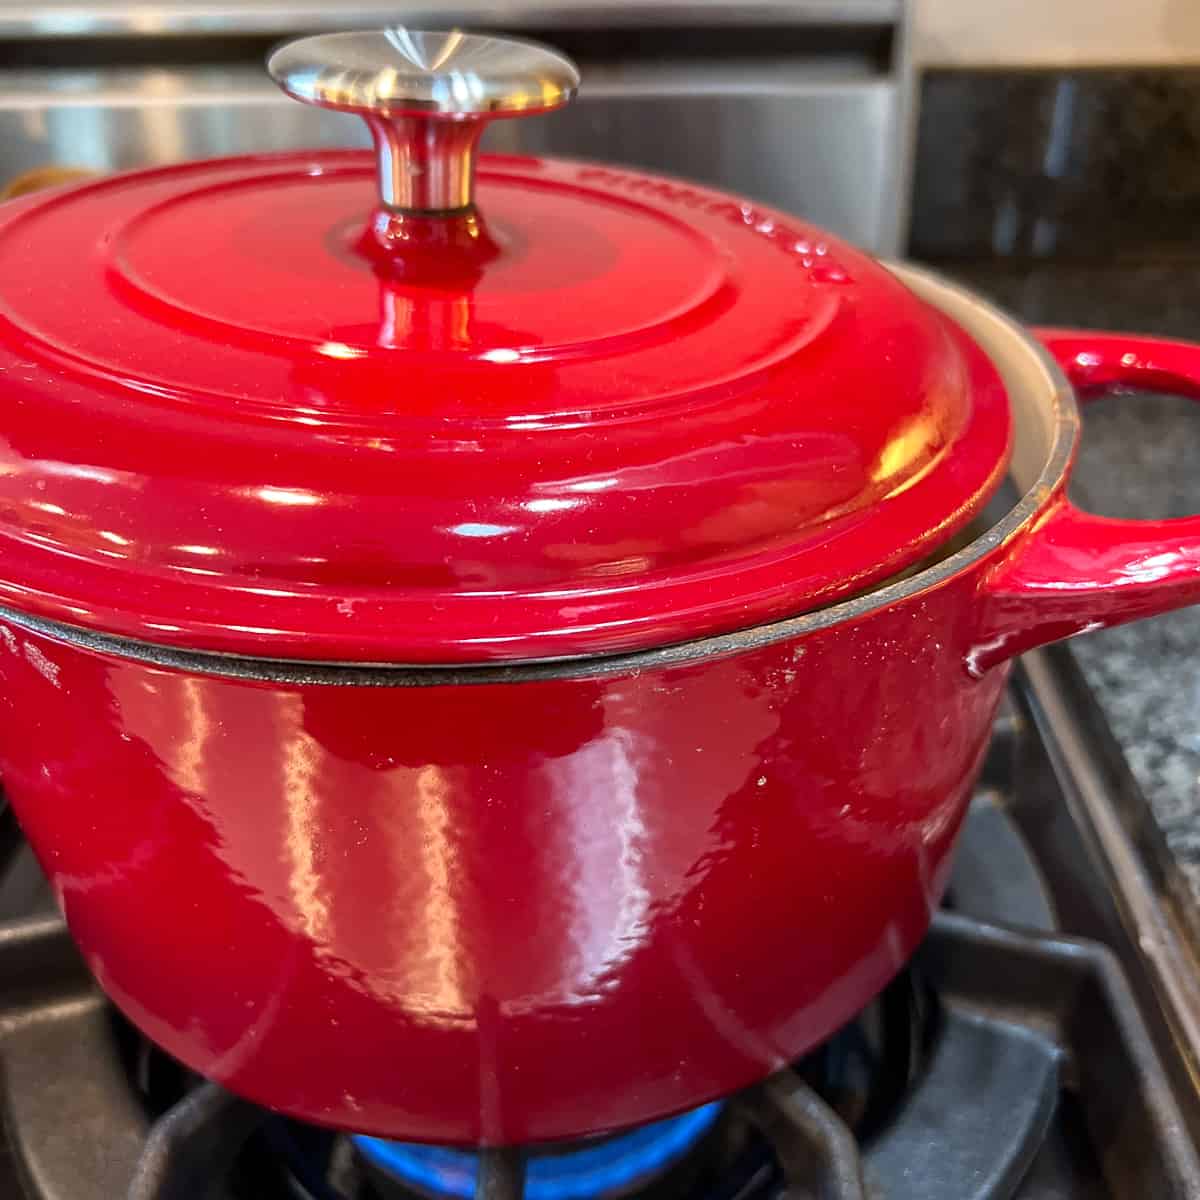 A side view of the soup pot with lid partially covering the pot and flame on the stovetop.